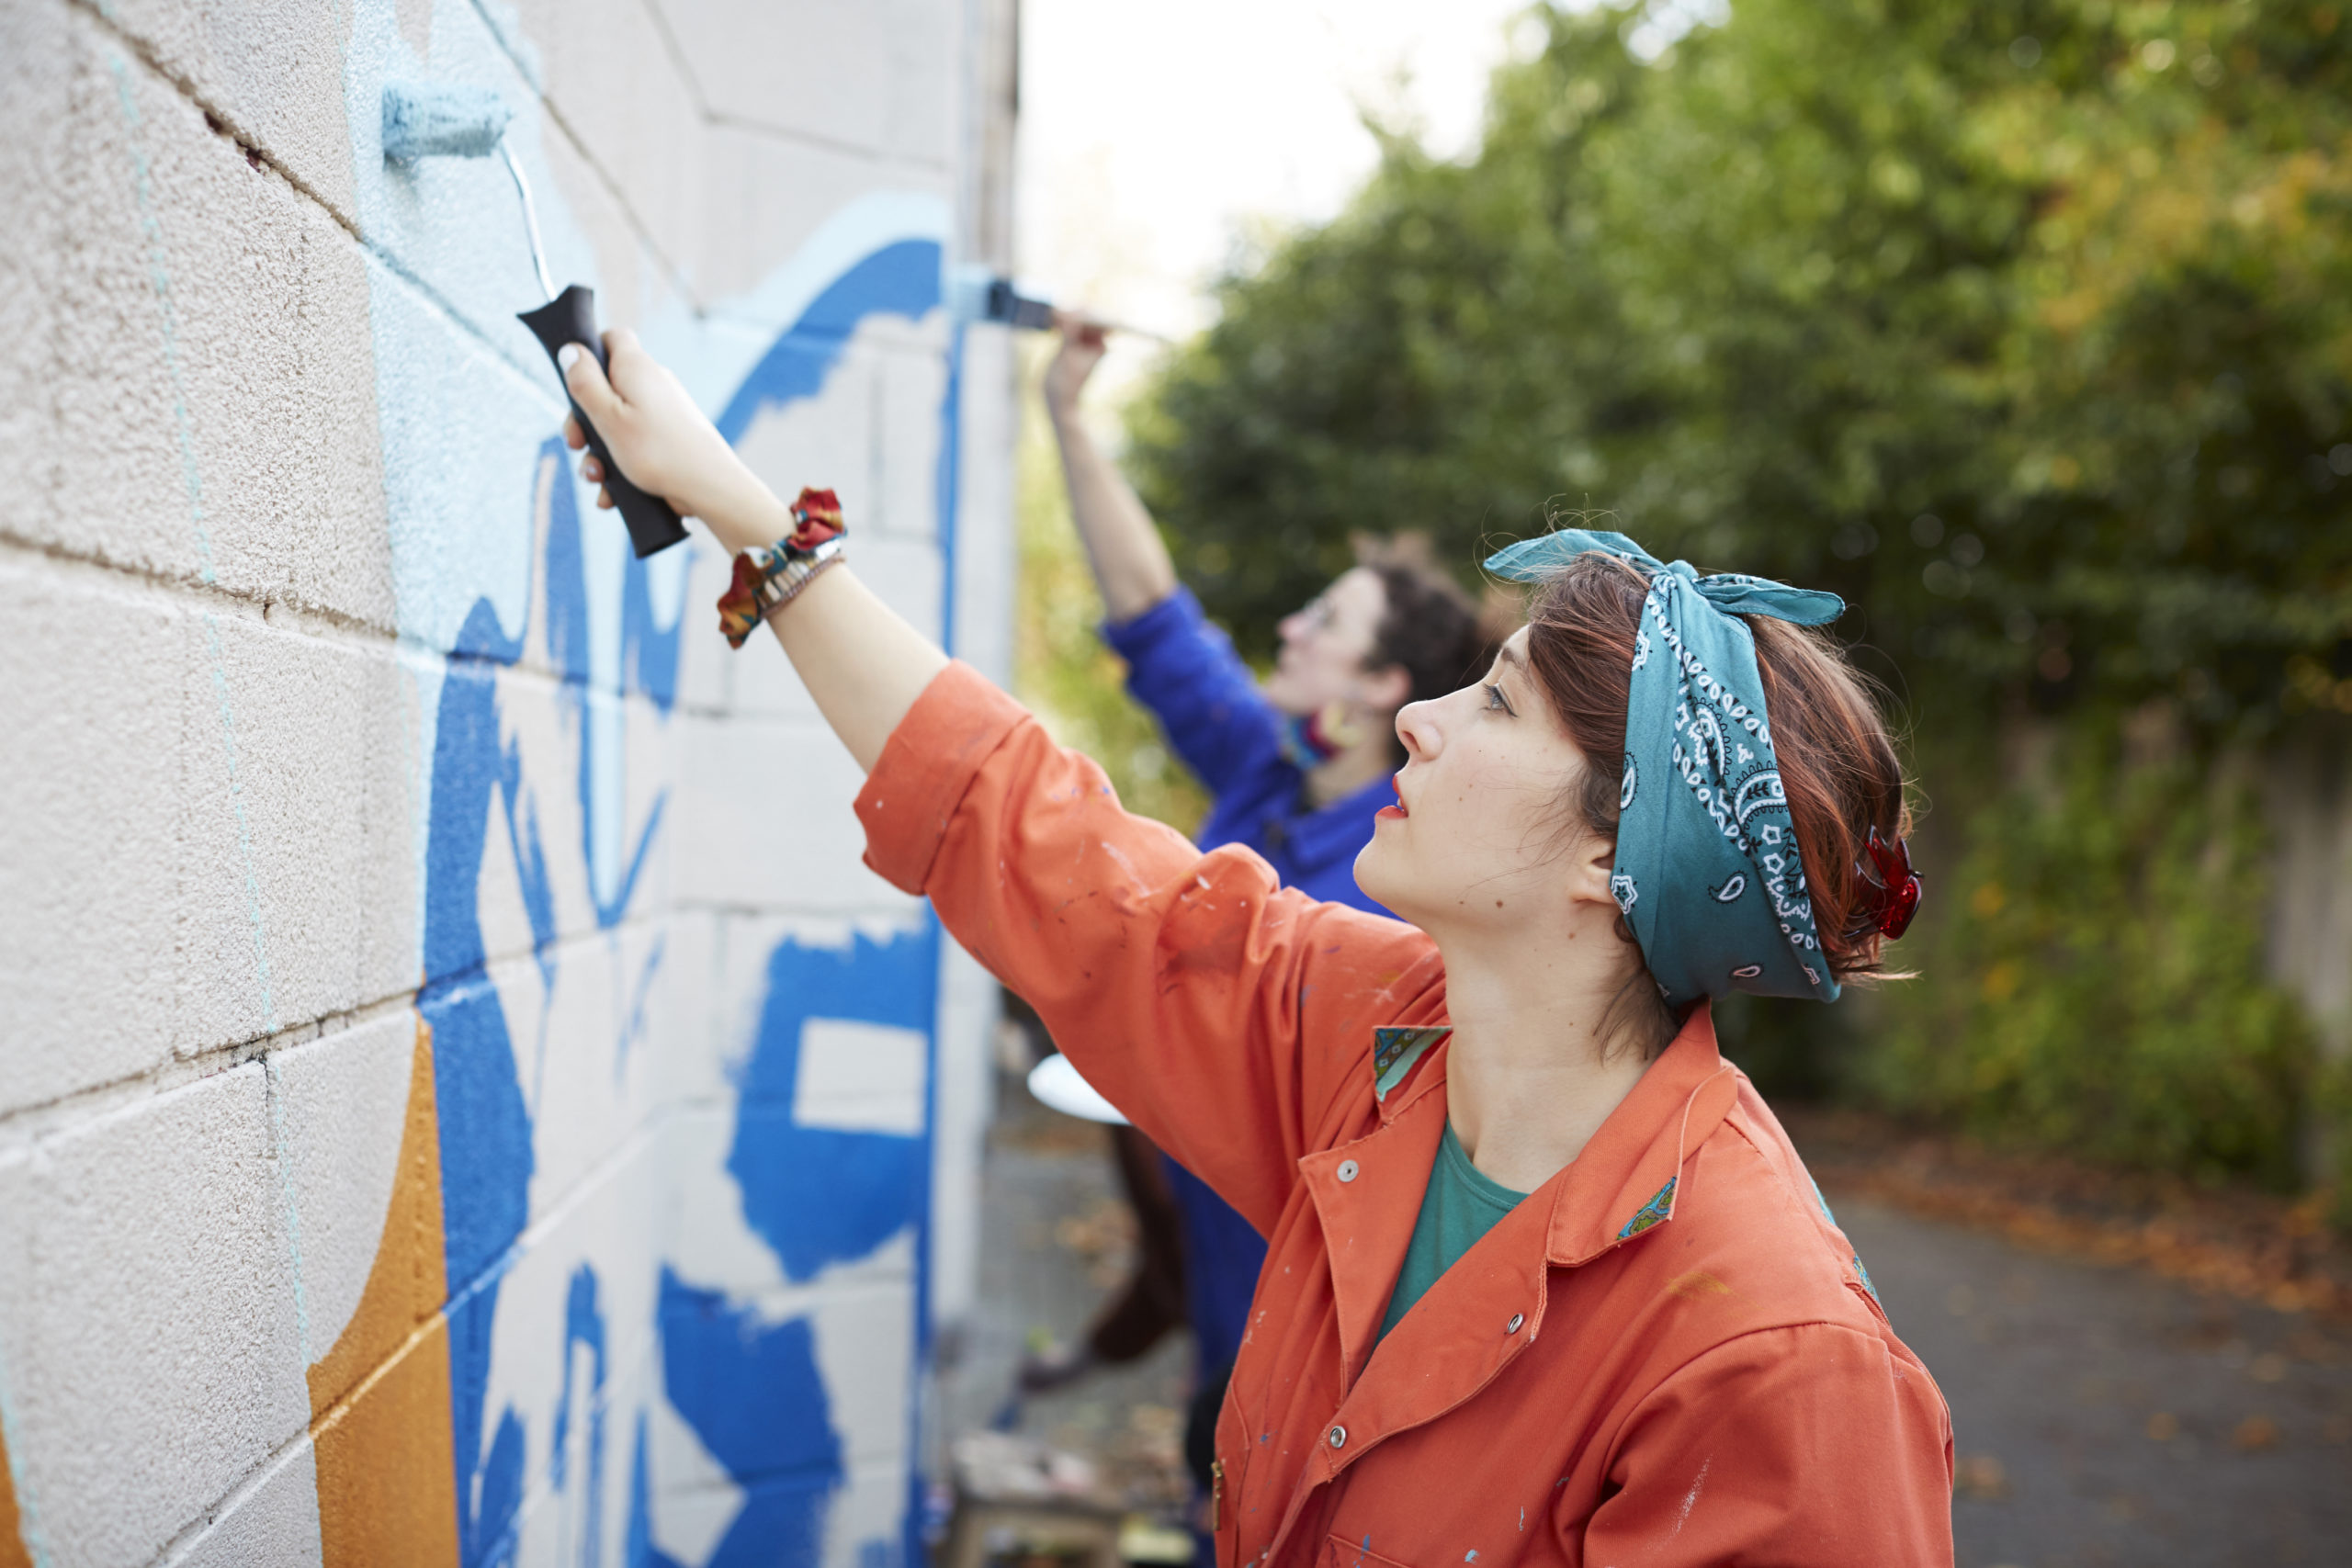 Artist Jenny Simmons painting the walls of Easton Leisure Centre